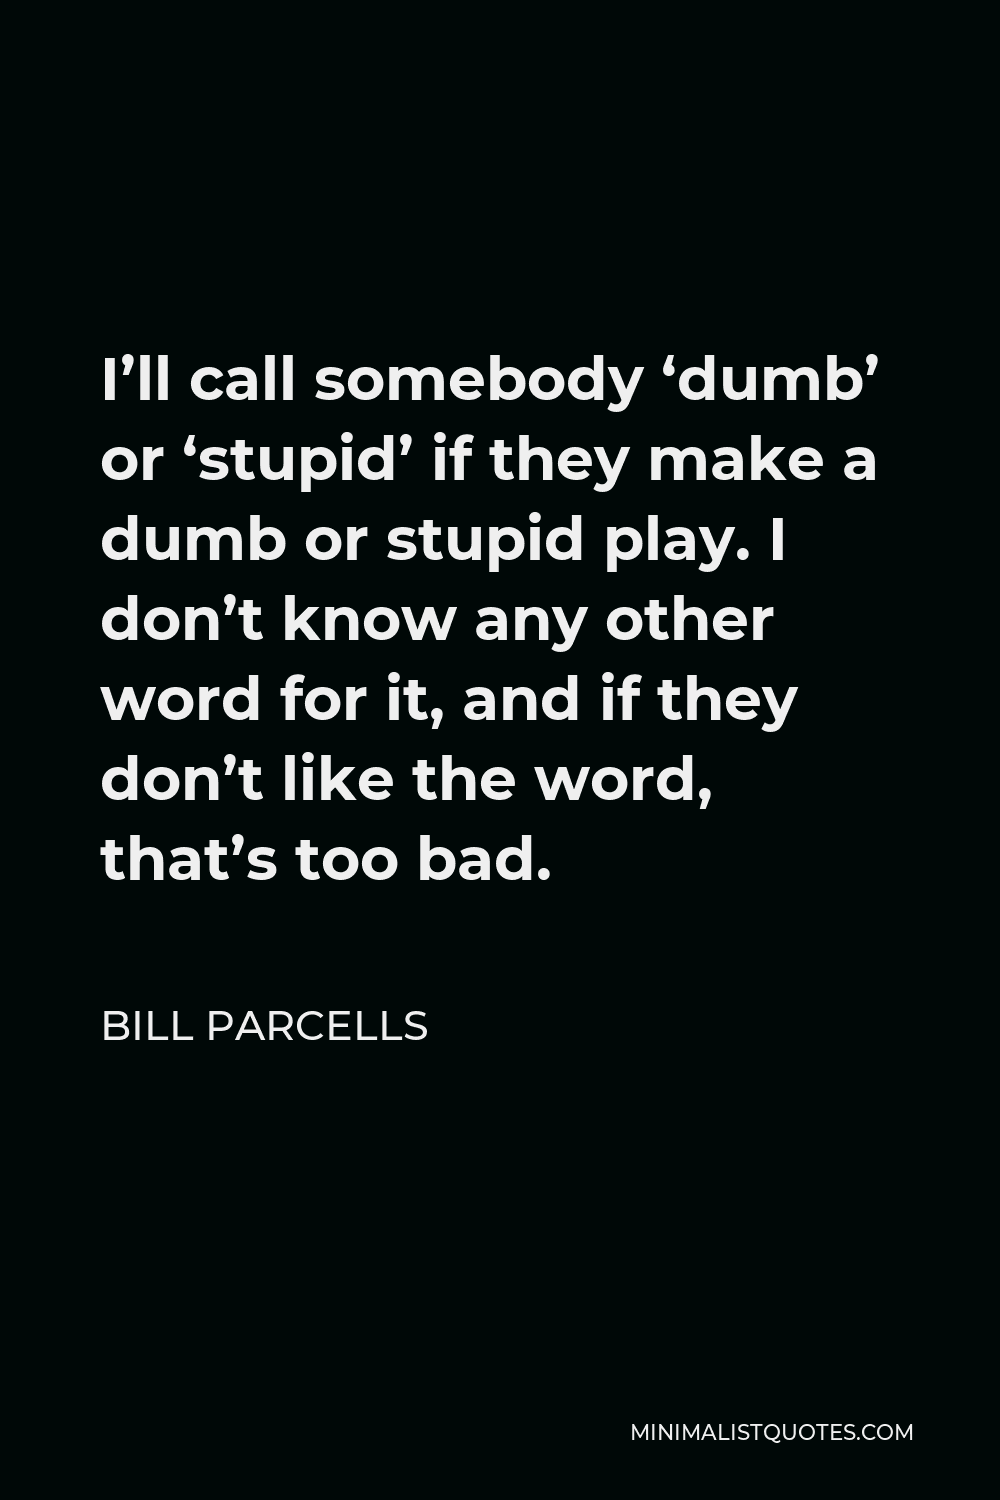 Bill Parcells Quote - I’ll call somebody ‘dumb’ or ‘stupid’ if they make a dumb or stupid play. I don’t know any other word for it, and if they don’t like the word, that’s too bad.